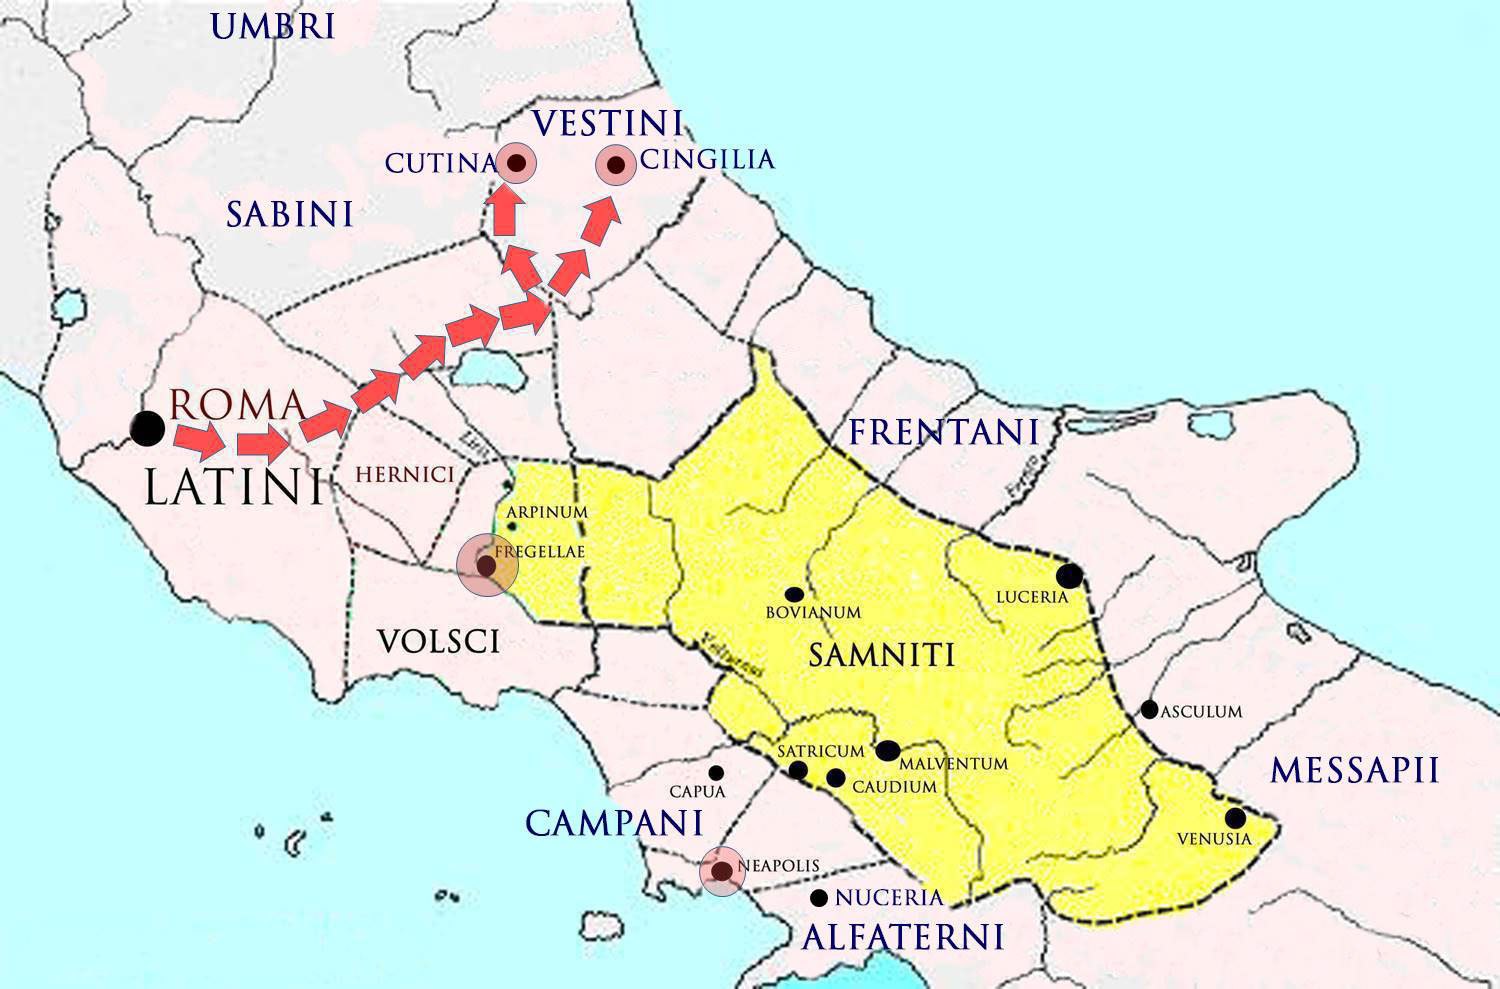 Roman army invaded the land of the Vestini